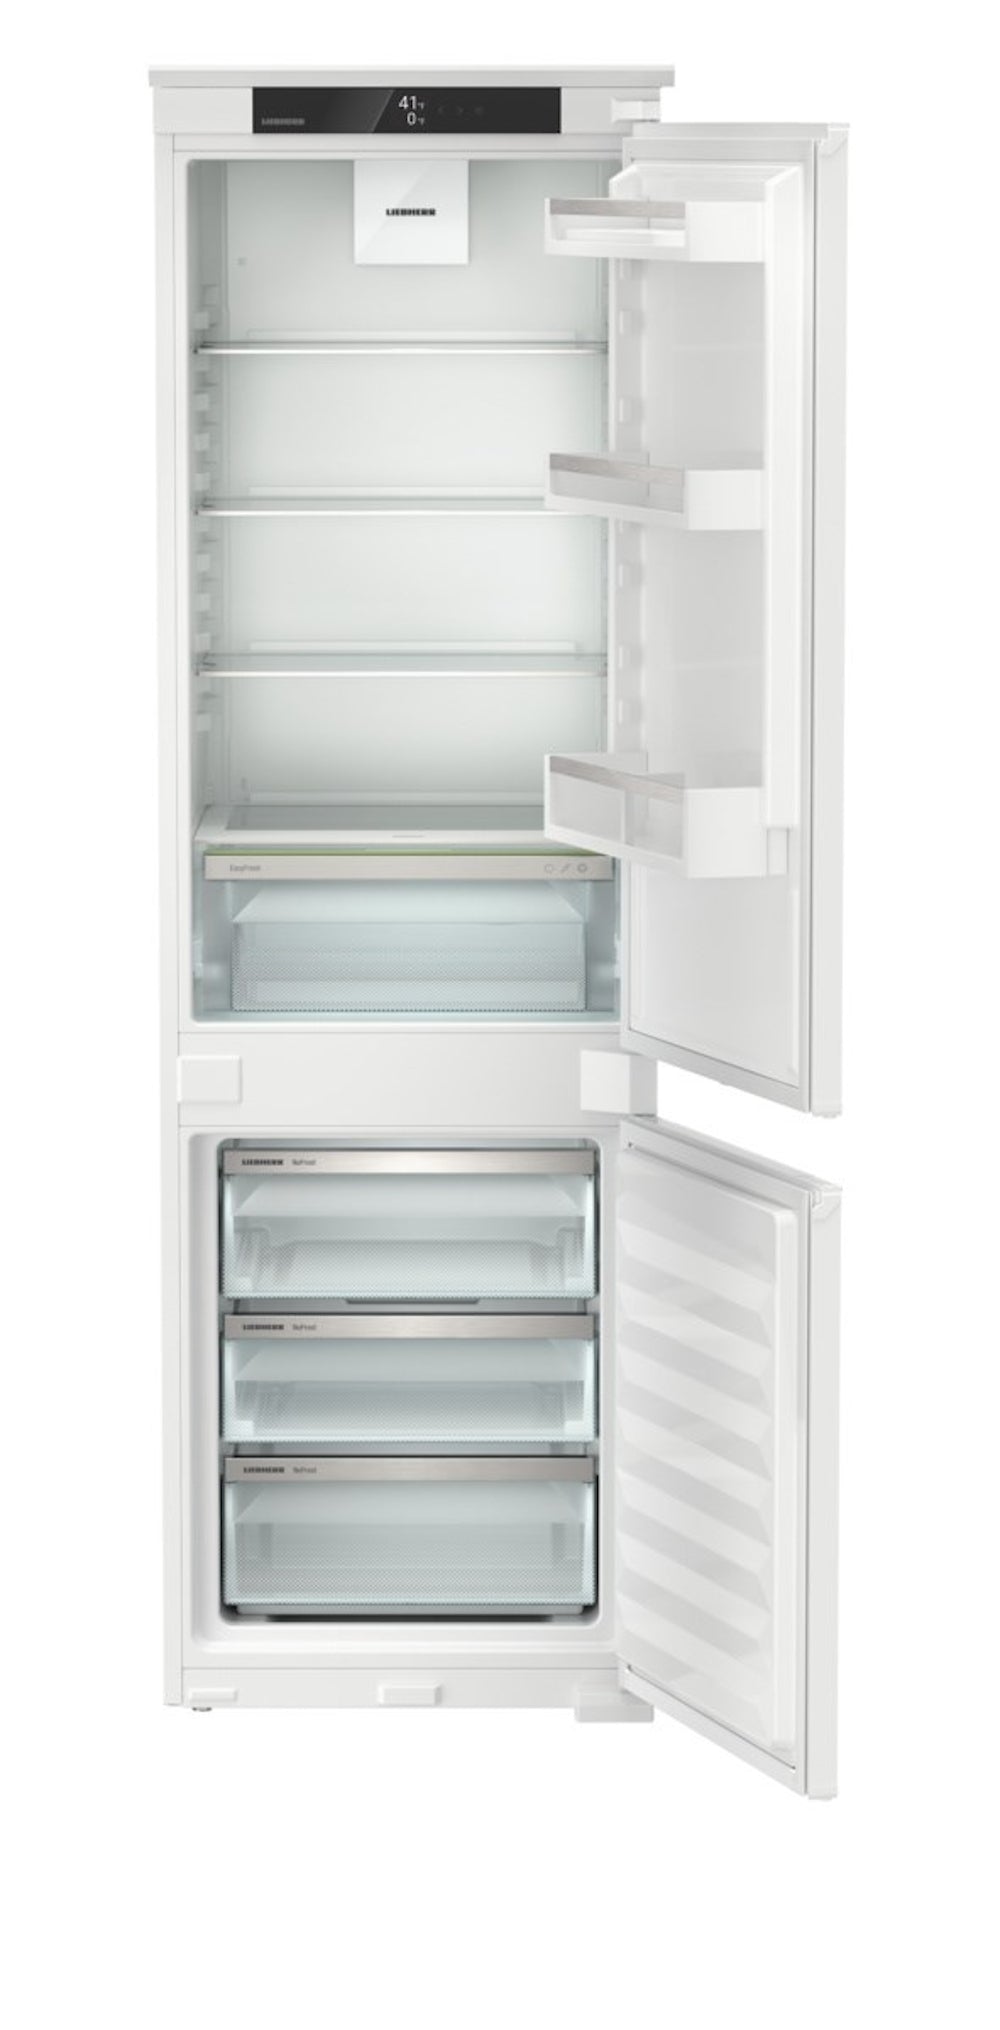 Liebherr - 21.5 Inch 8.9 cu. ft Built In / Integrated Refrigerator in Panel Ready - ICS5100